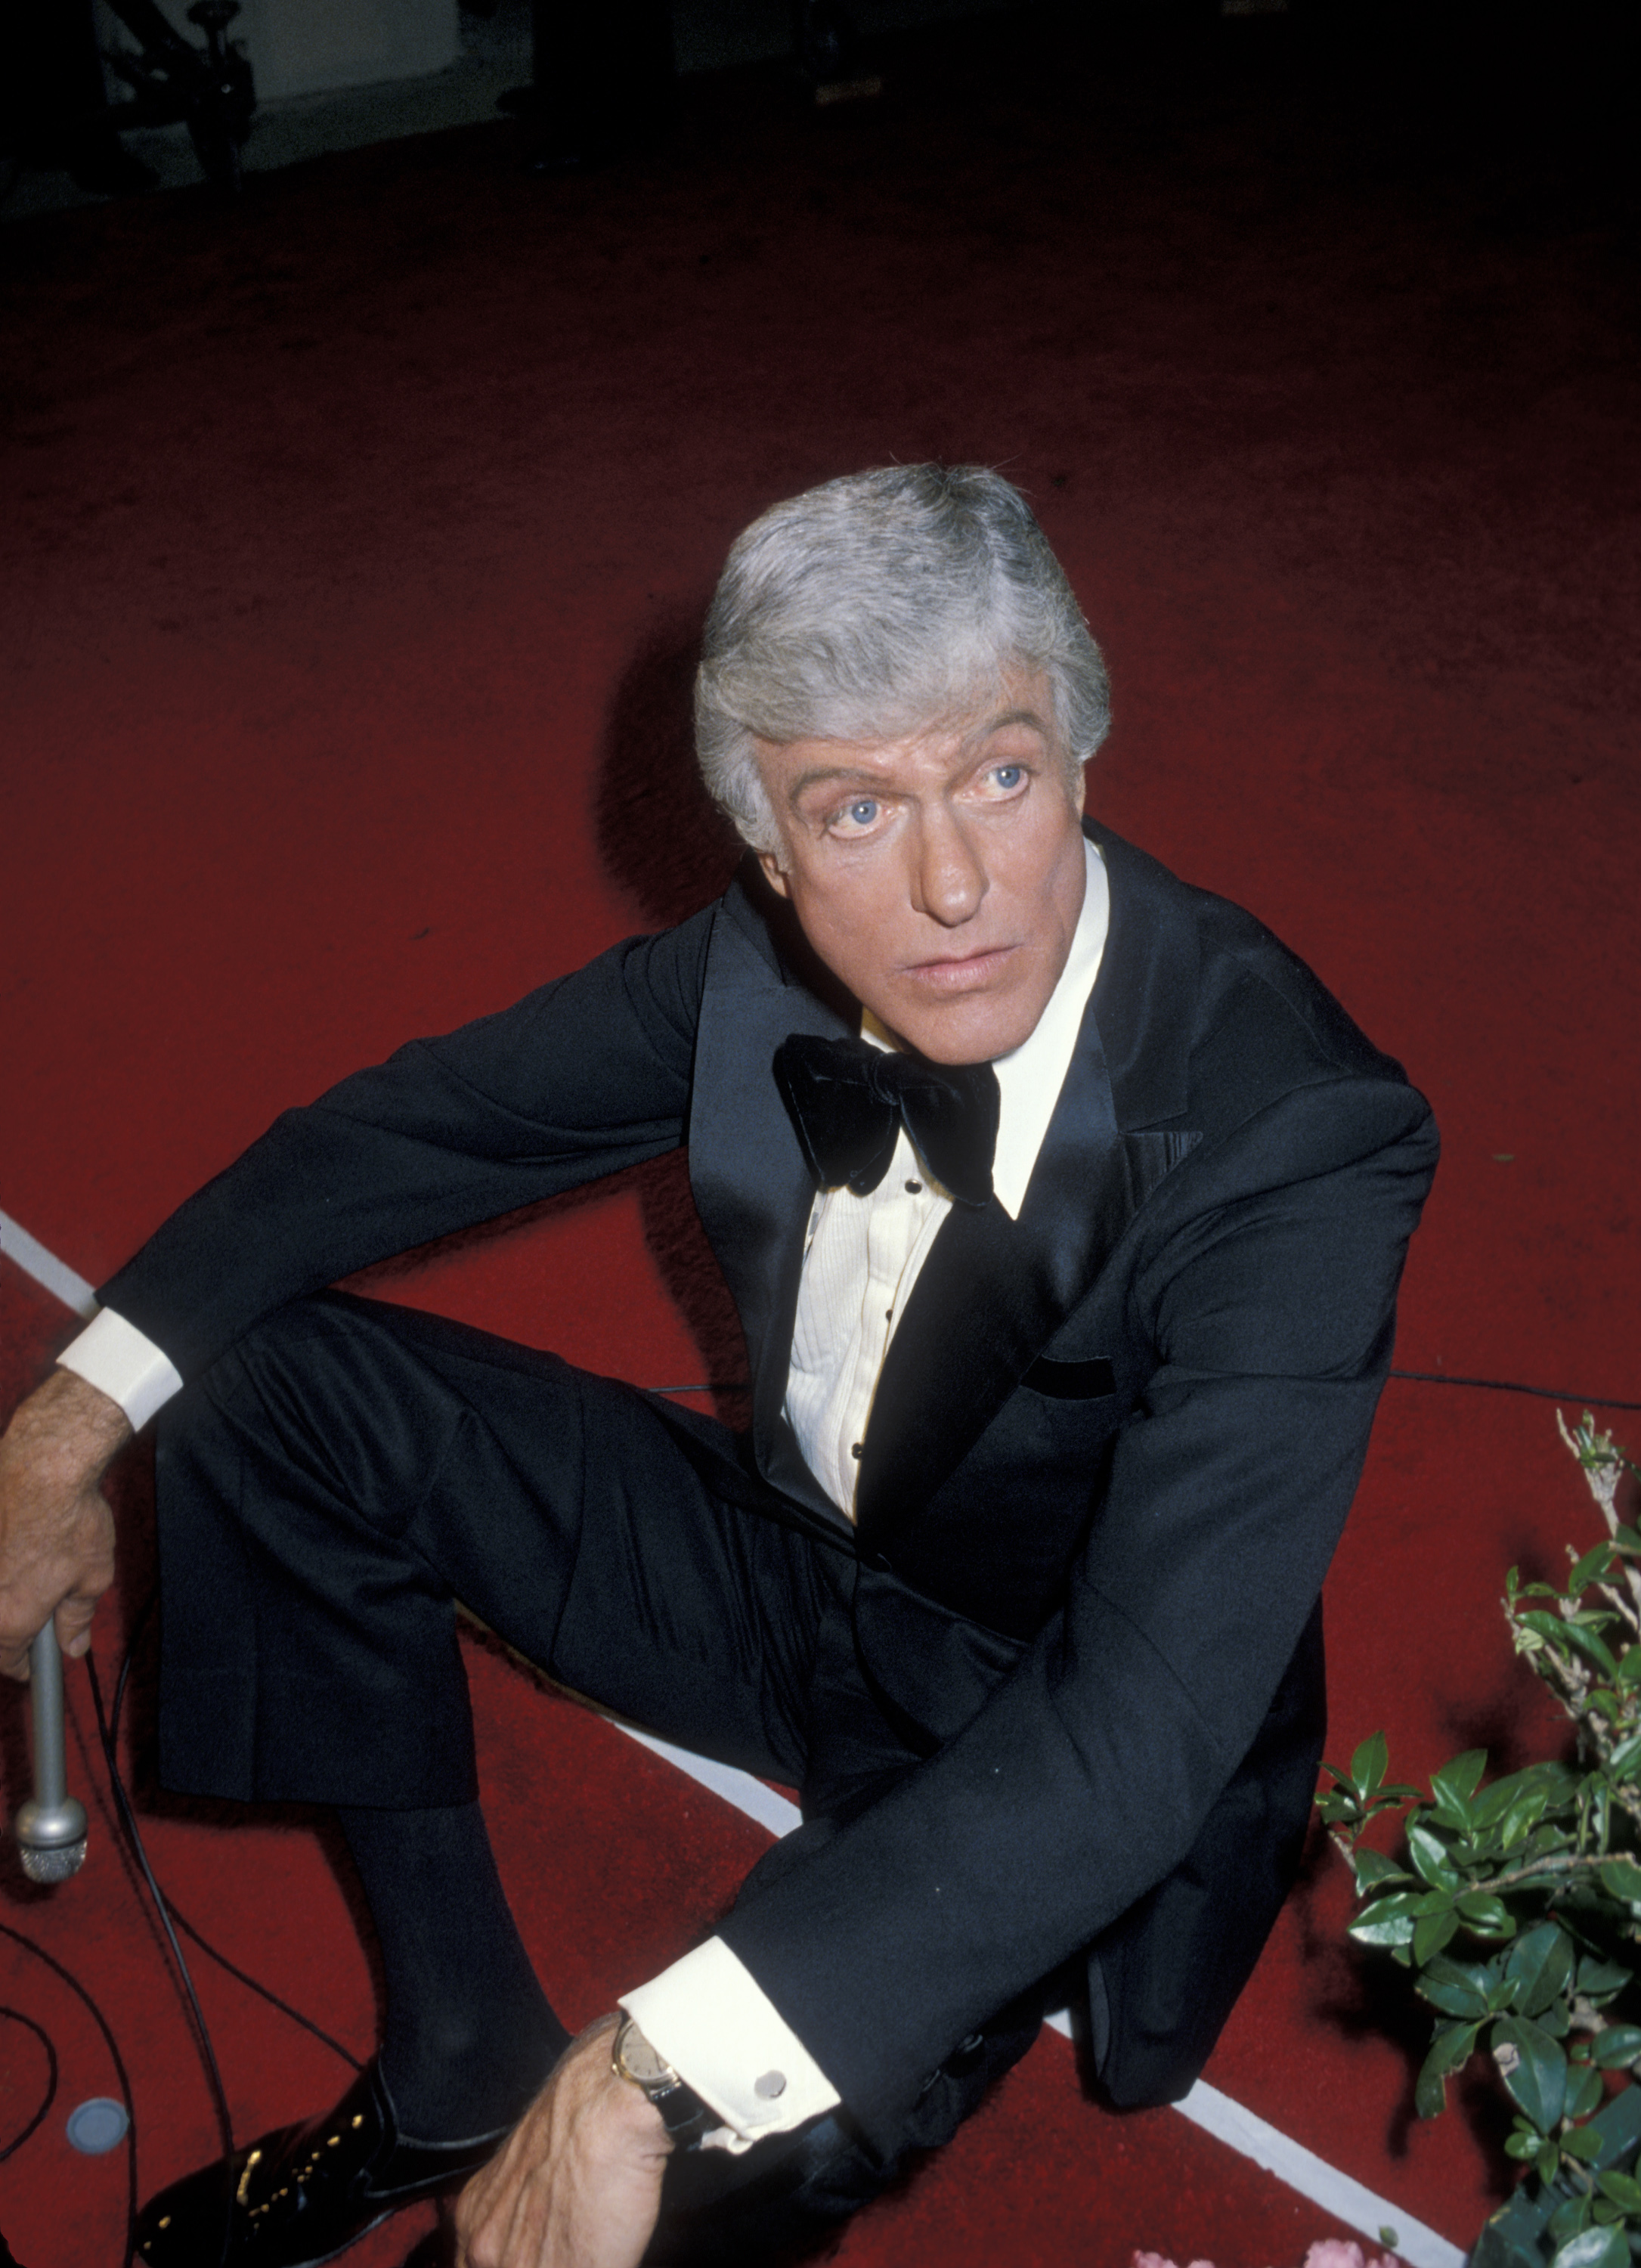 Dick Van Dyke during Premiere of "The Muppets Go Hollywood" at Coconut Grove in Los Angeles, California, United States | Source: Getty Images